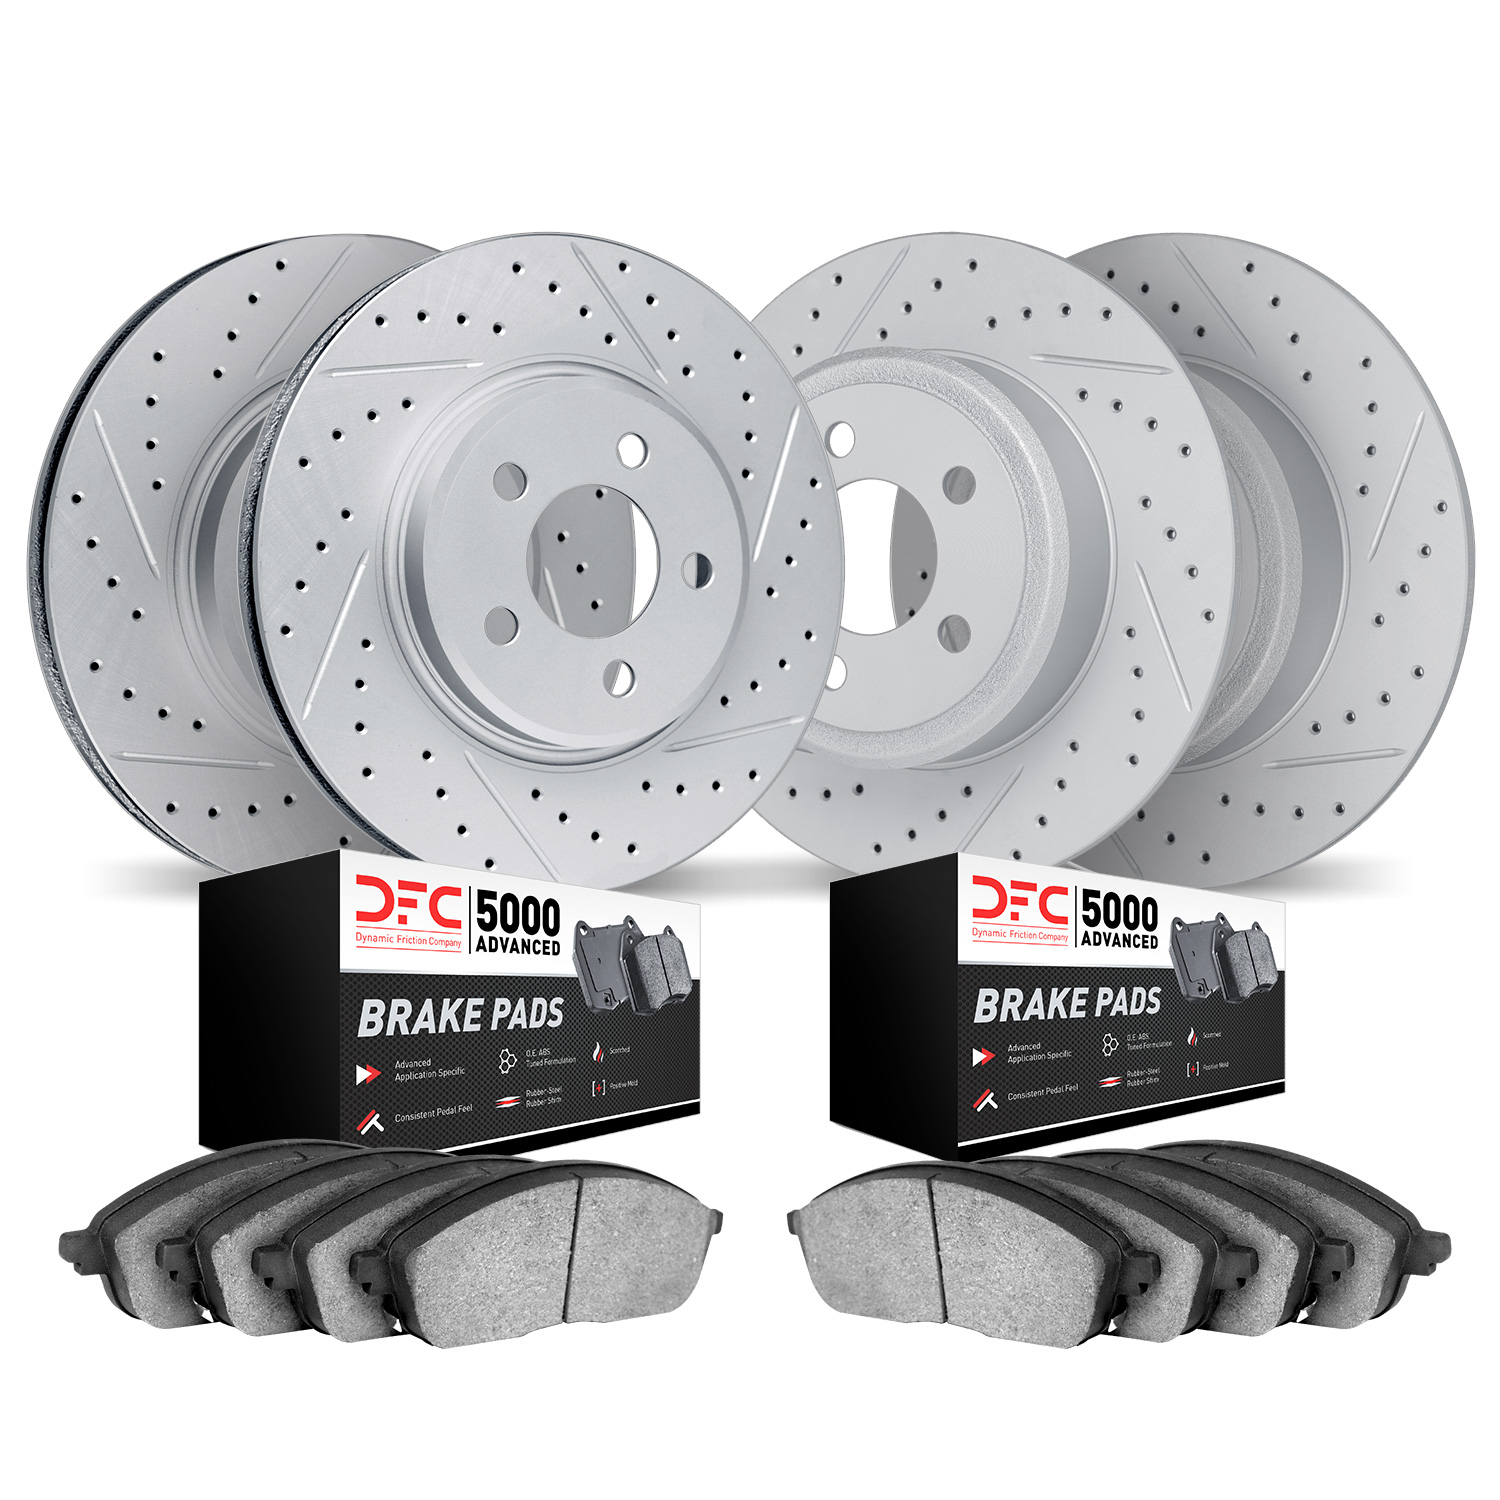 2504-76105 Geoperformance Drilled/Slotted Rotors w/5000 Advanced Brake Pads Kit, 2004-2005 Lexus/Toyota/Scion, Position: Front a